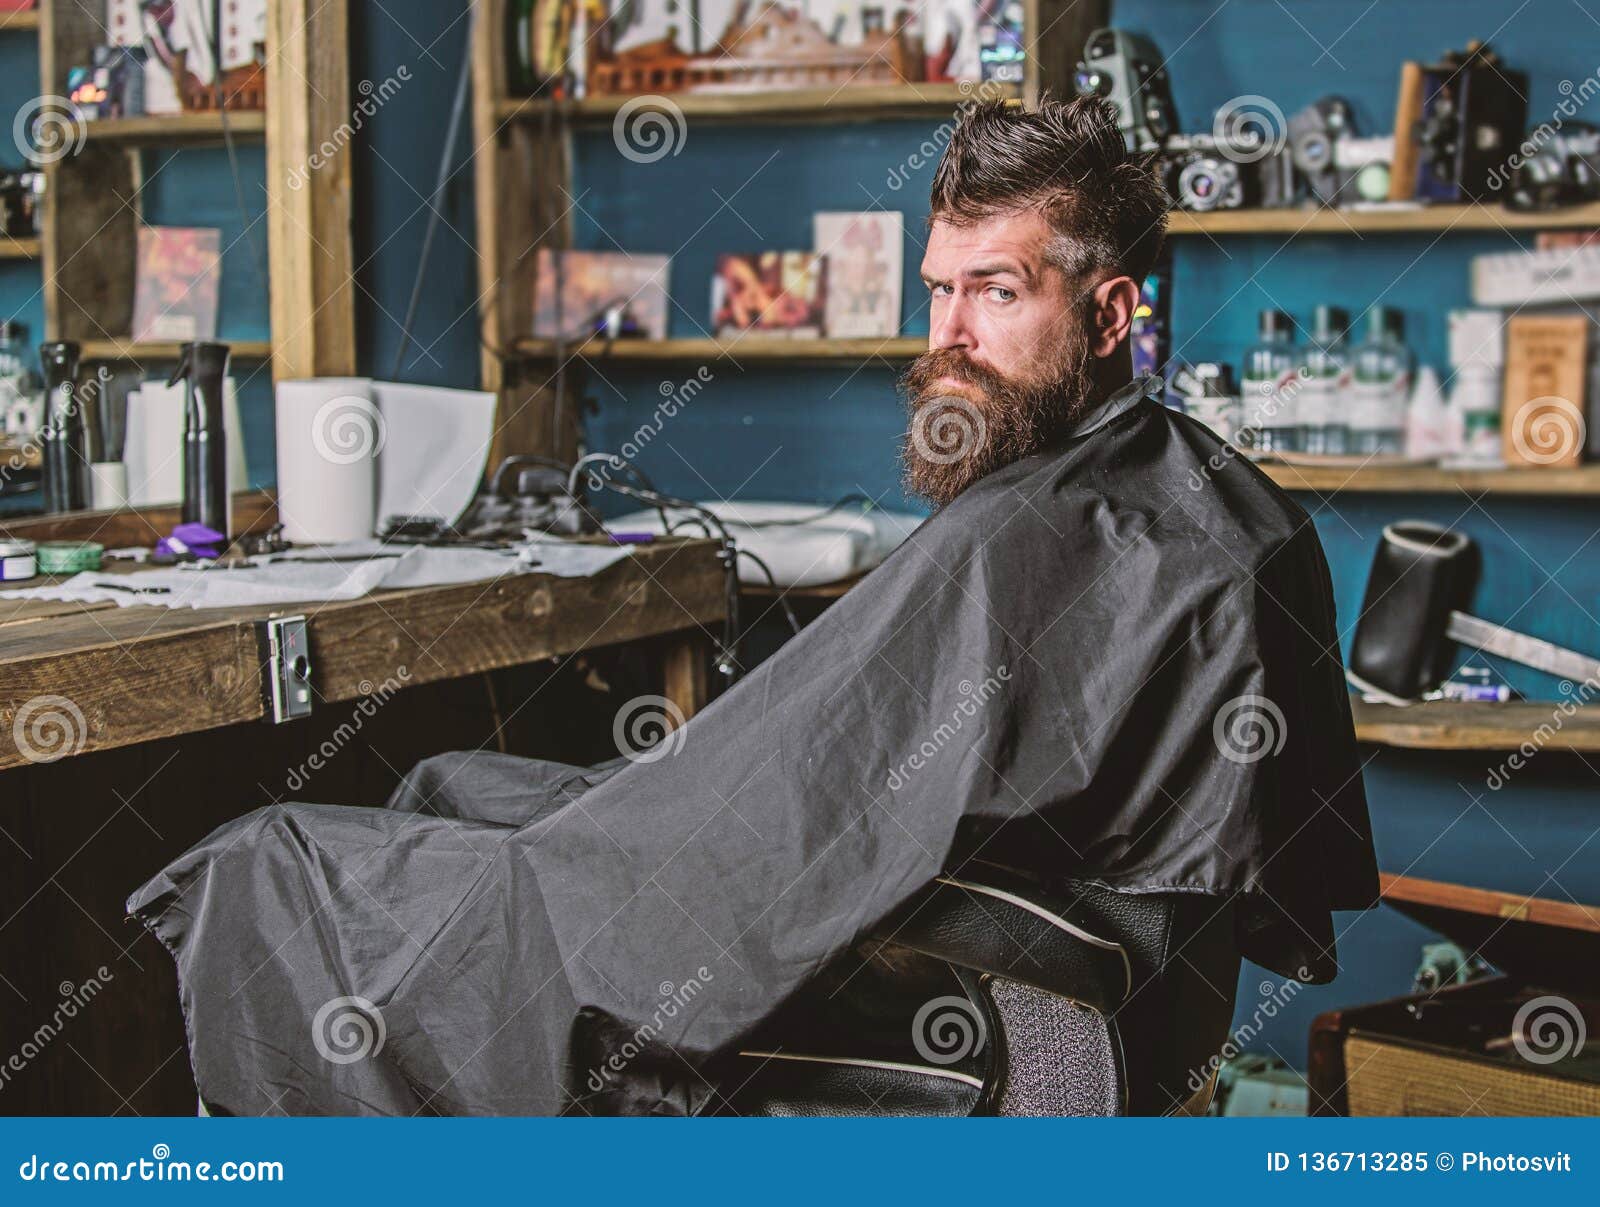 Man with Beard Covered with Black Cape Sits in Hairdressers Chair in ...